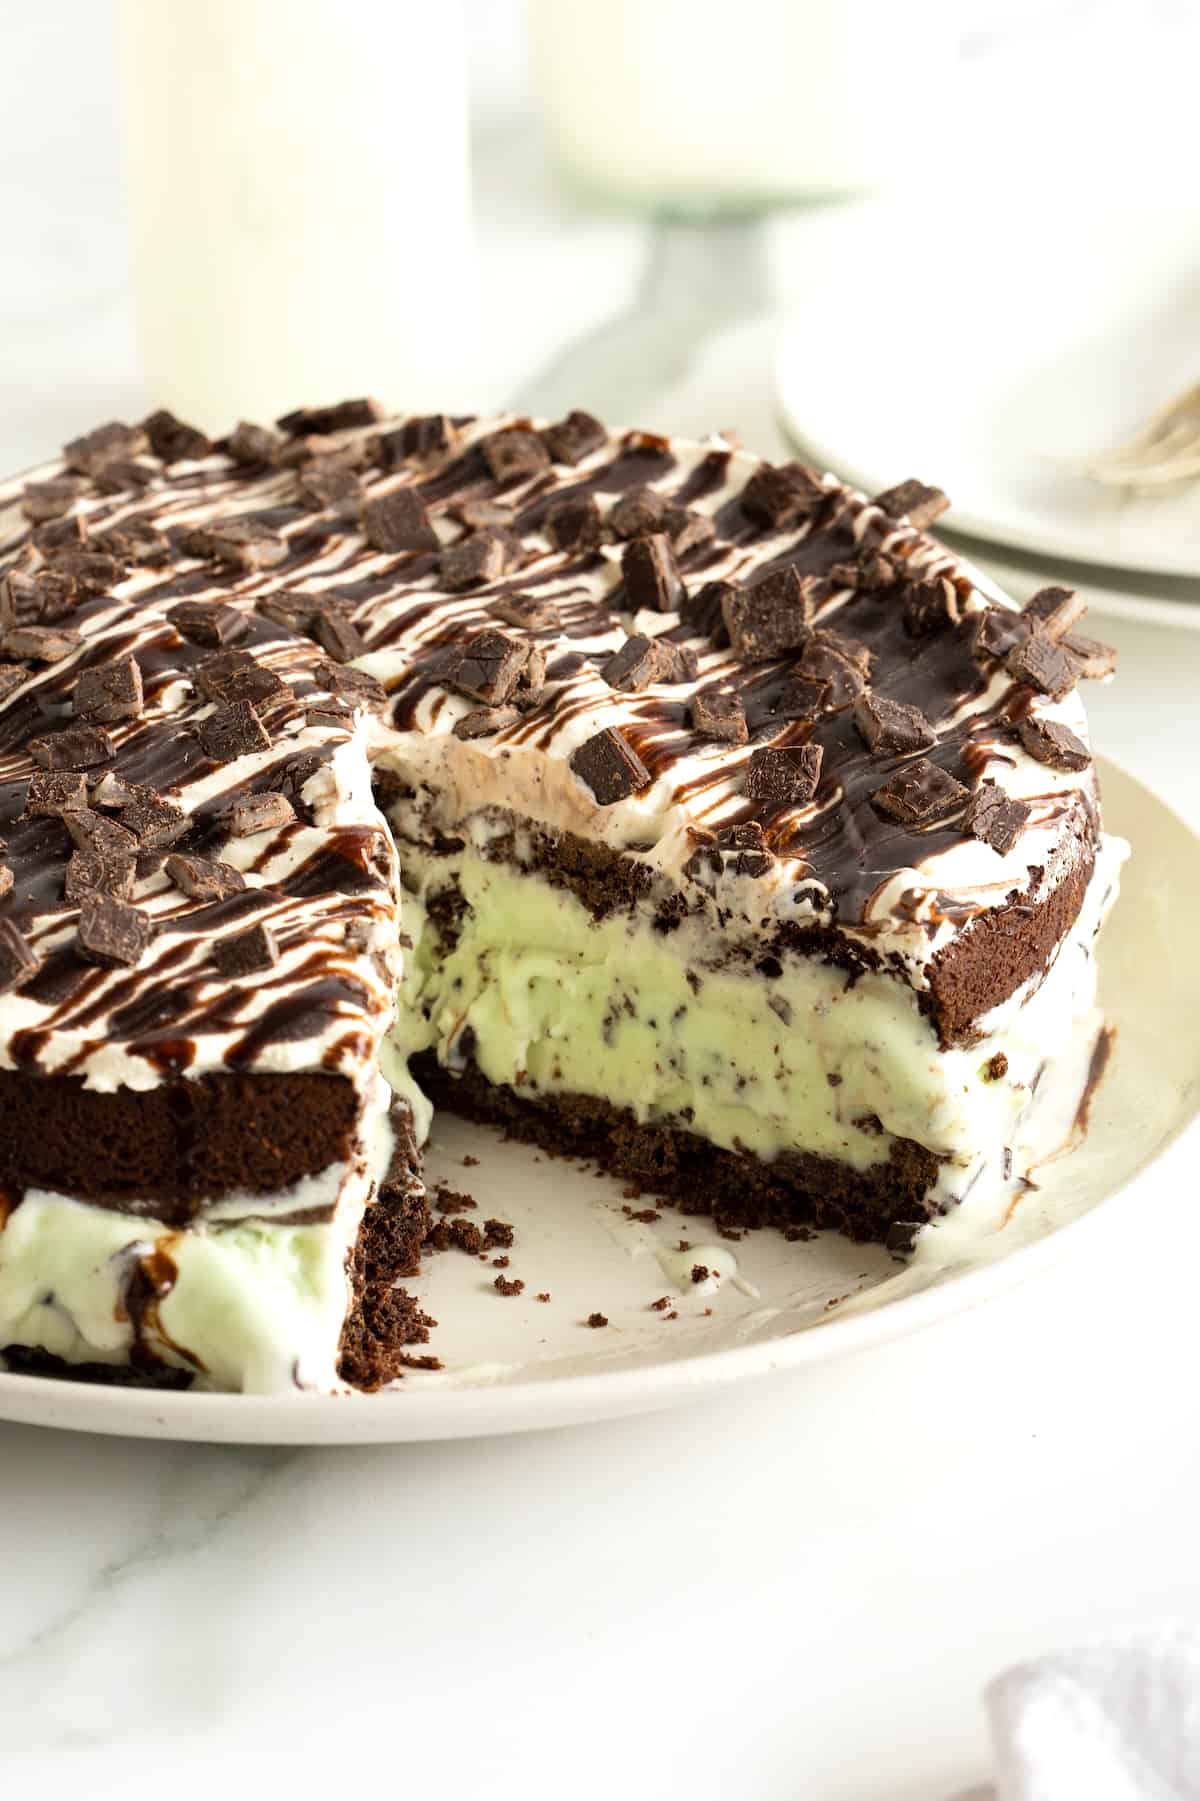 An ice cream cake with a chocolate cookie bottom and mint chocolate chip ice cream in the middle, covered in whipped topping, chocolate sauce and chopped Andes mints.